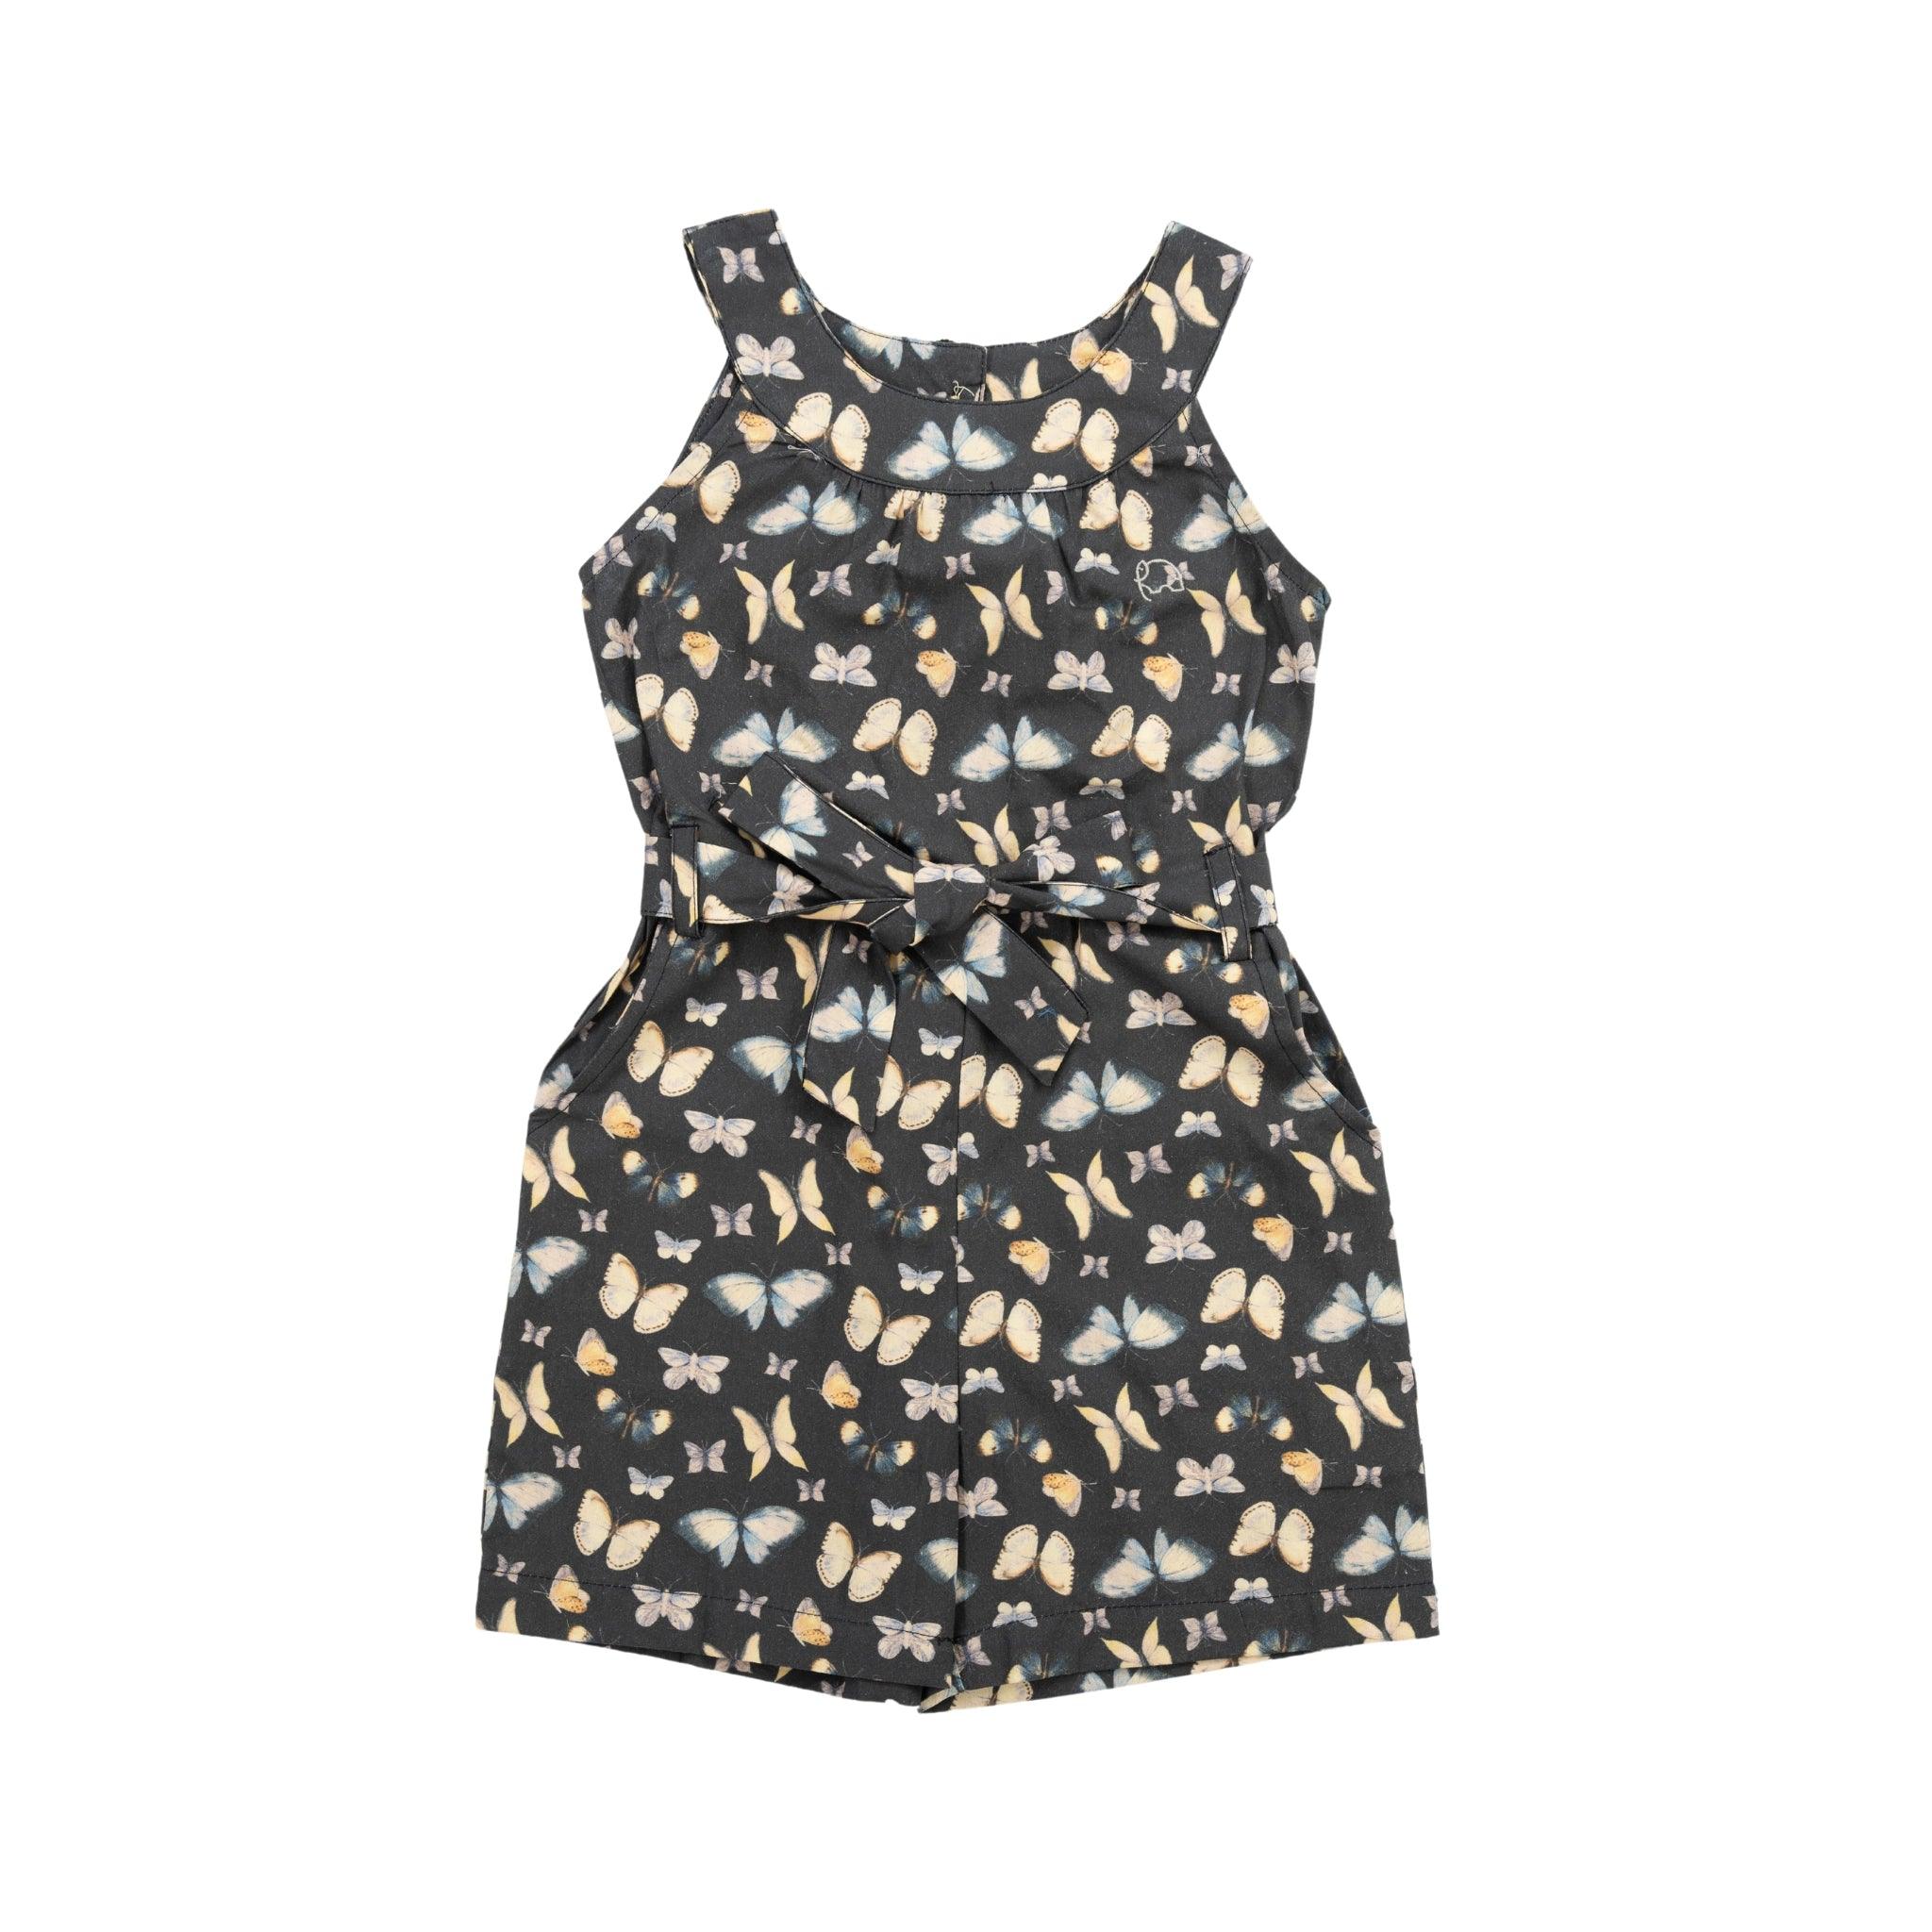 A sleeveless Pirate Black Adventure-ready Cotton Play Suit with a floral pattern and a waist belt, displayed against a white background by Karee.